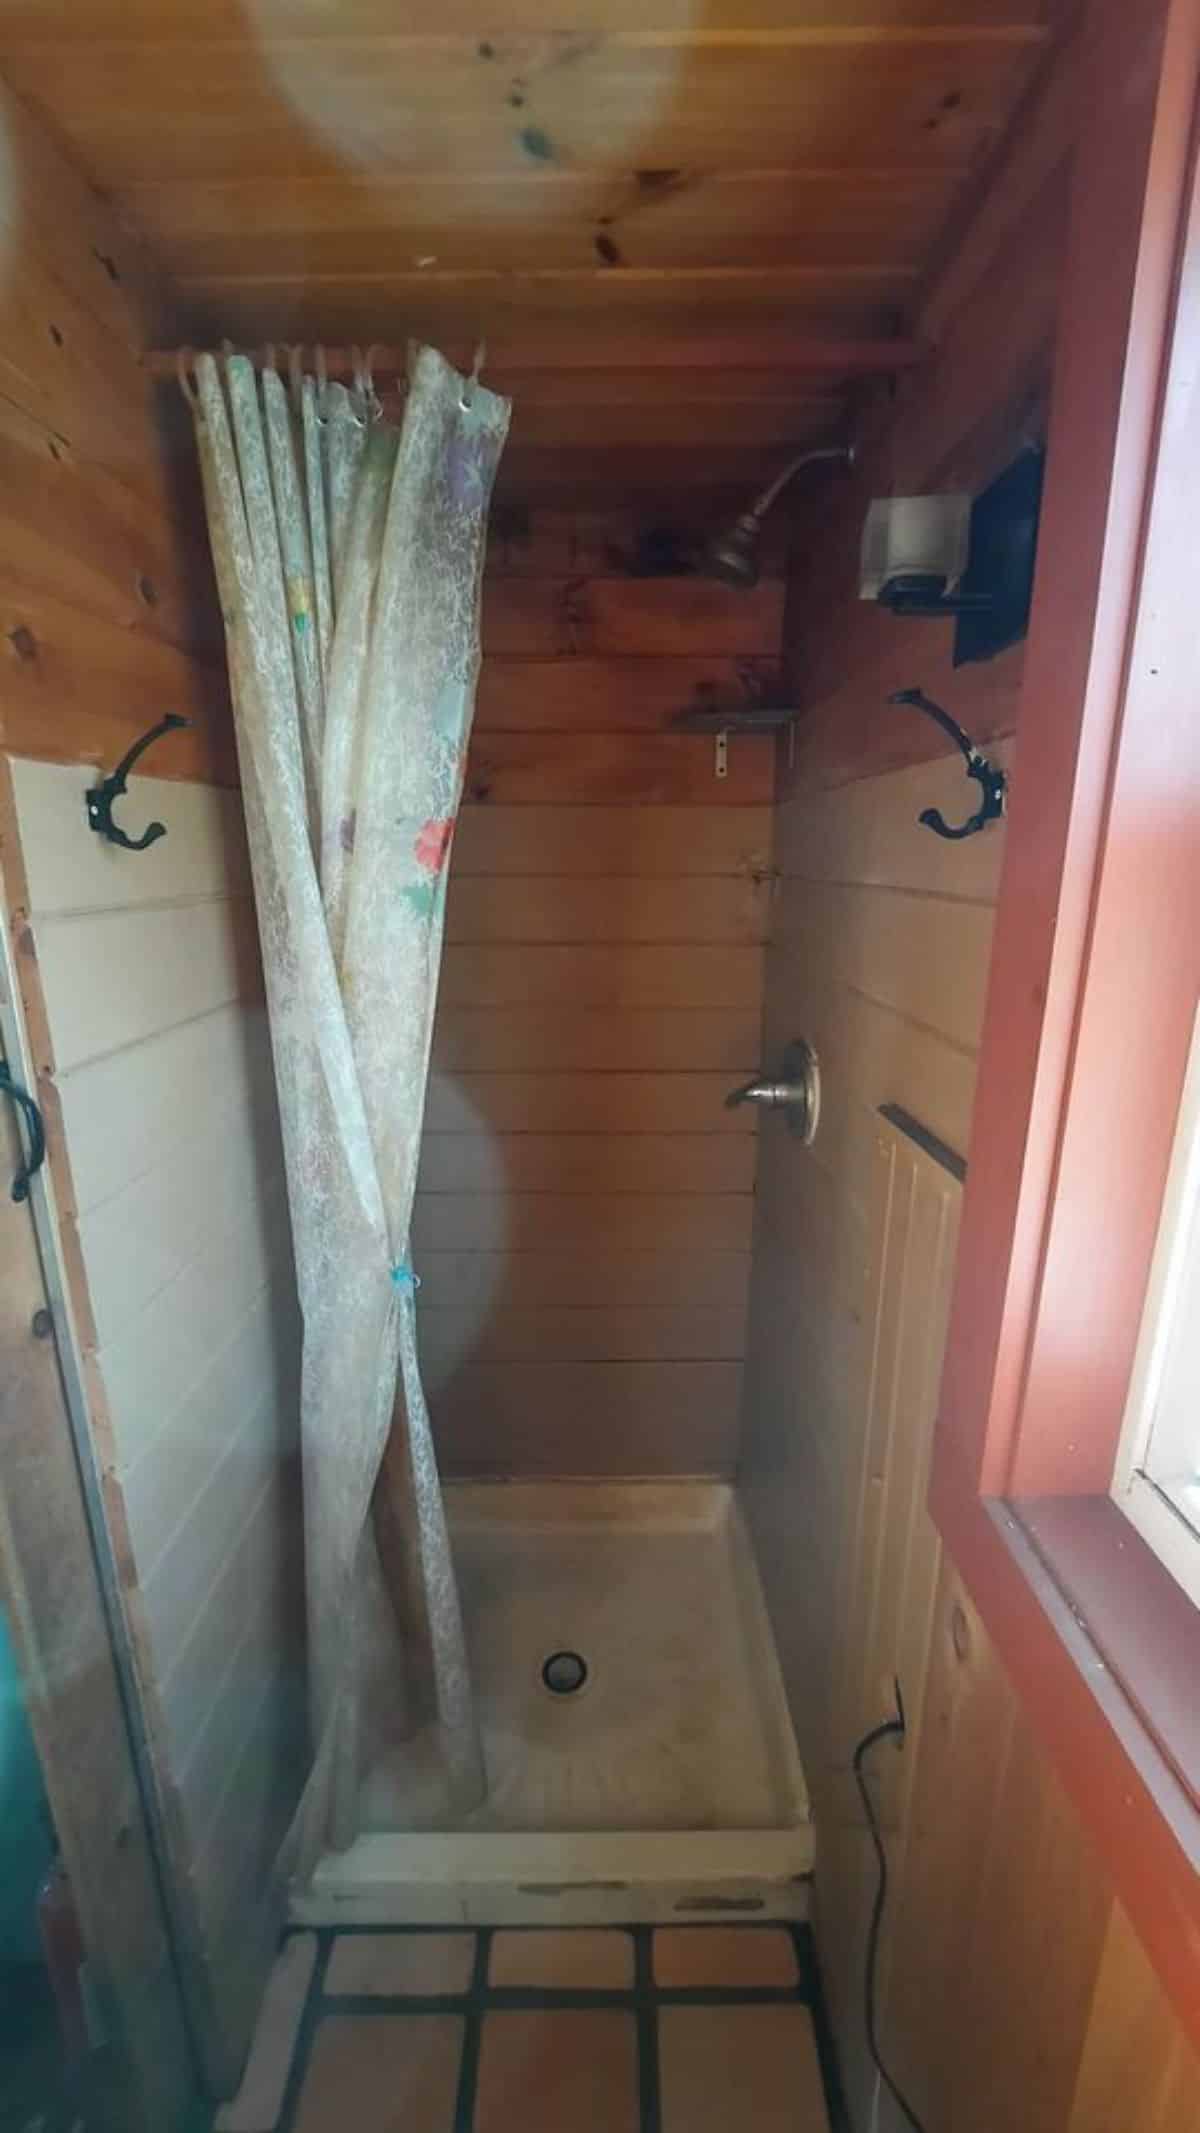 Bathroom has a compost toilet and separate shower area